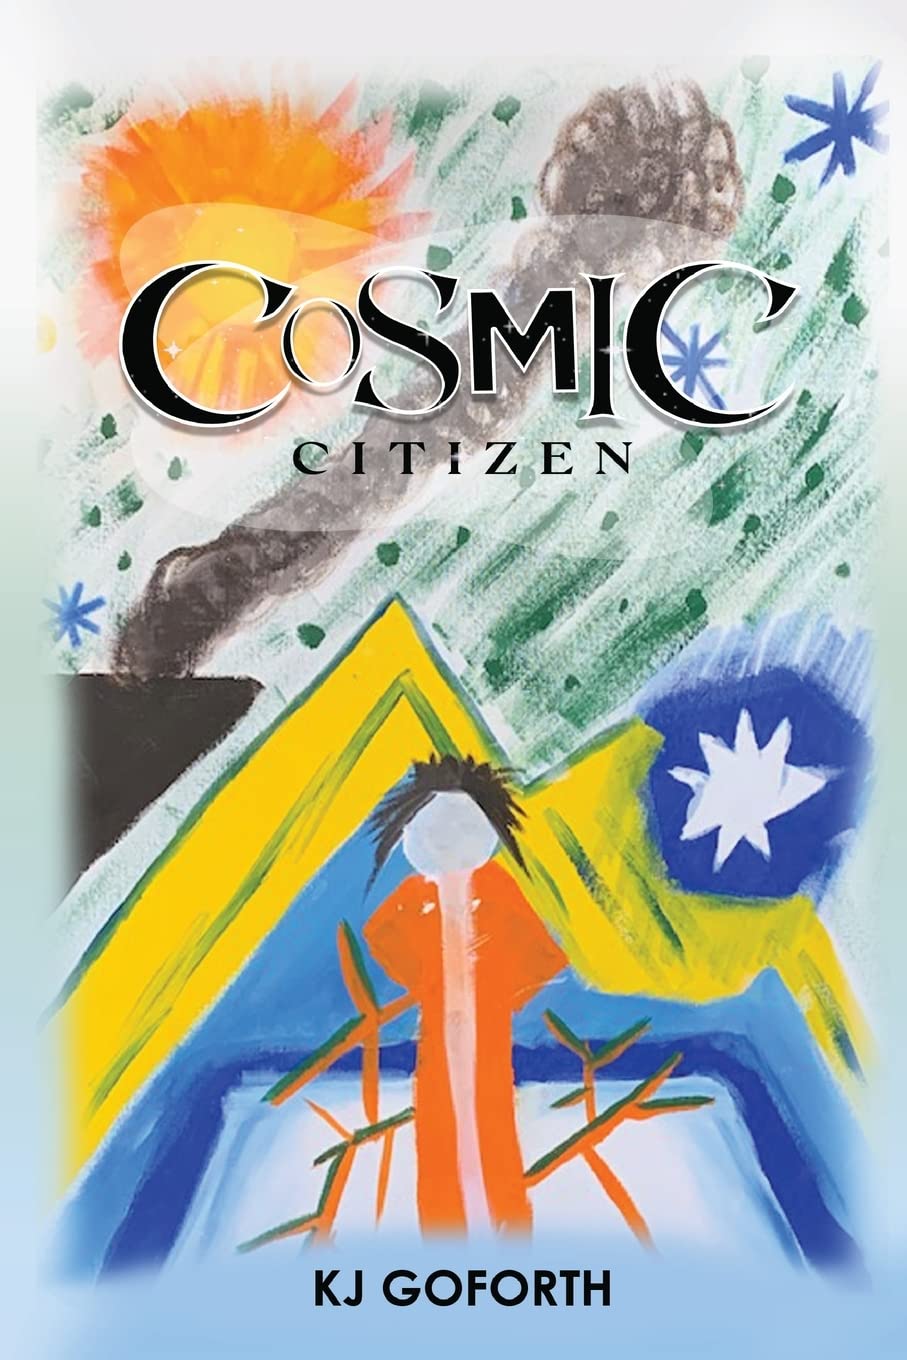 Author KJ Goforth’s New Poetry Release, Cosmic Citizen, Is an Introspective Look at the Healing Process and the Impact of Unconditional Love 1